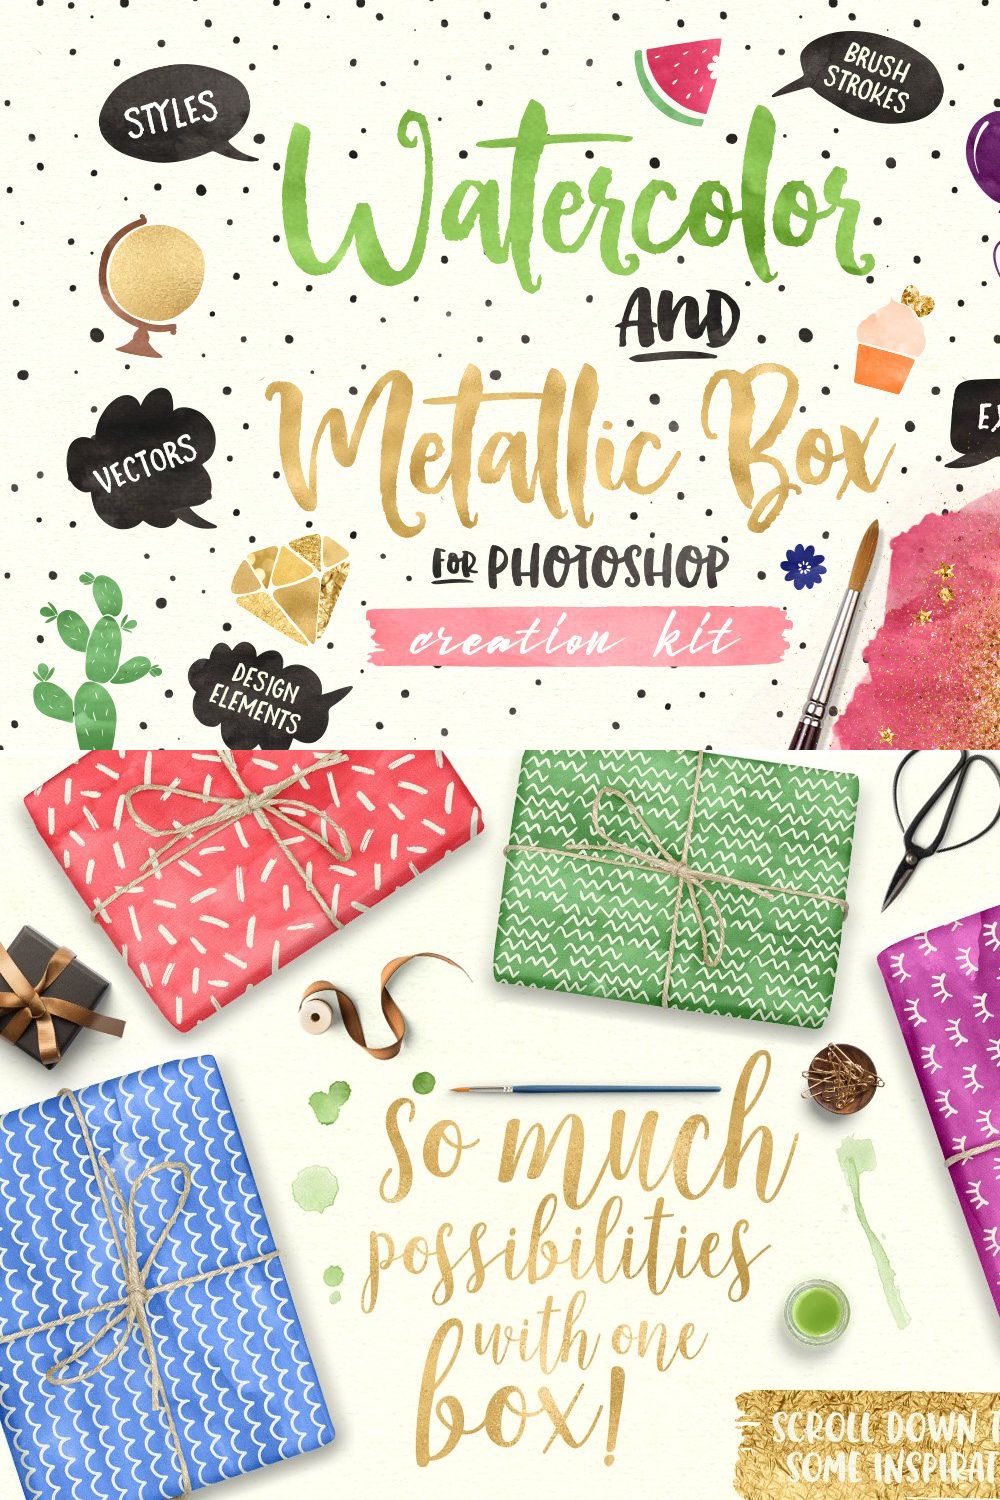 (PS) Watercolor and Metallic Box pinterest preview image.